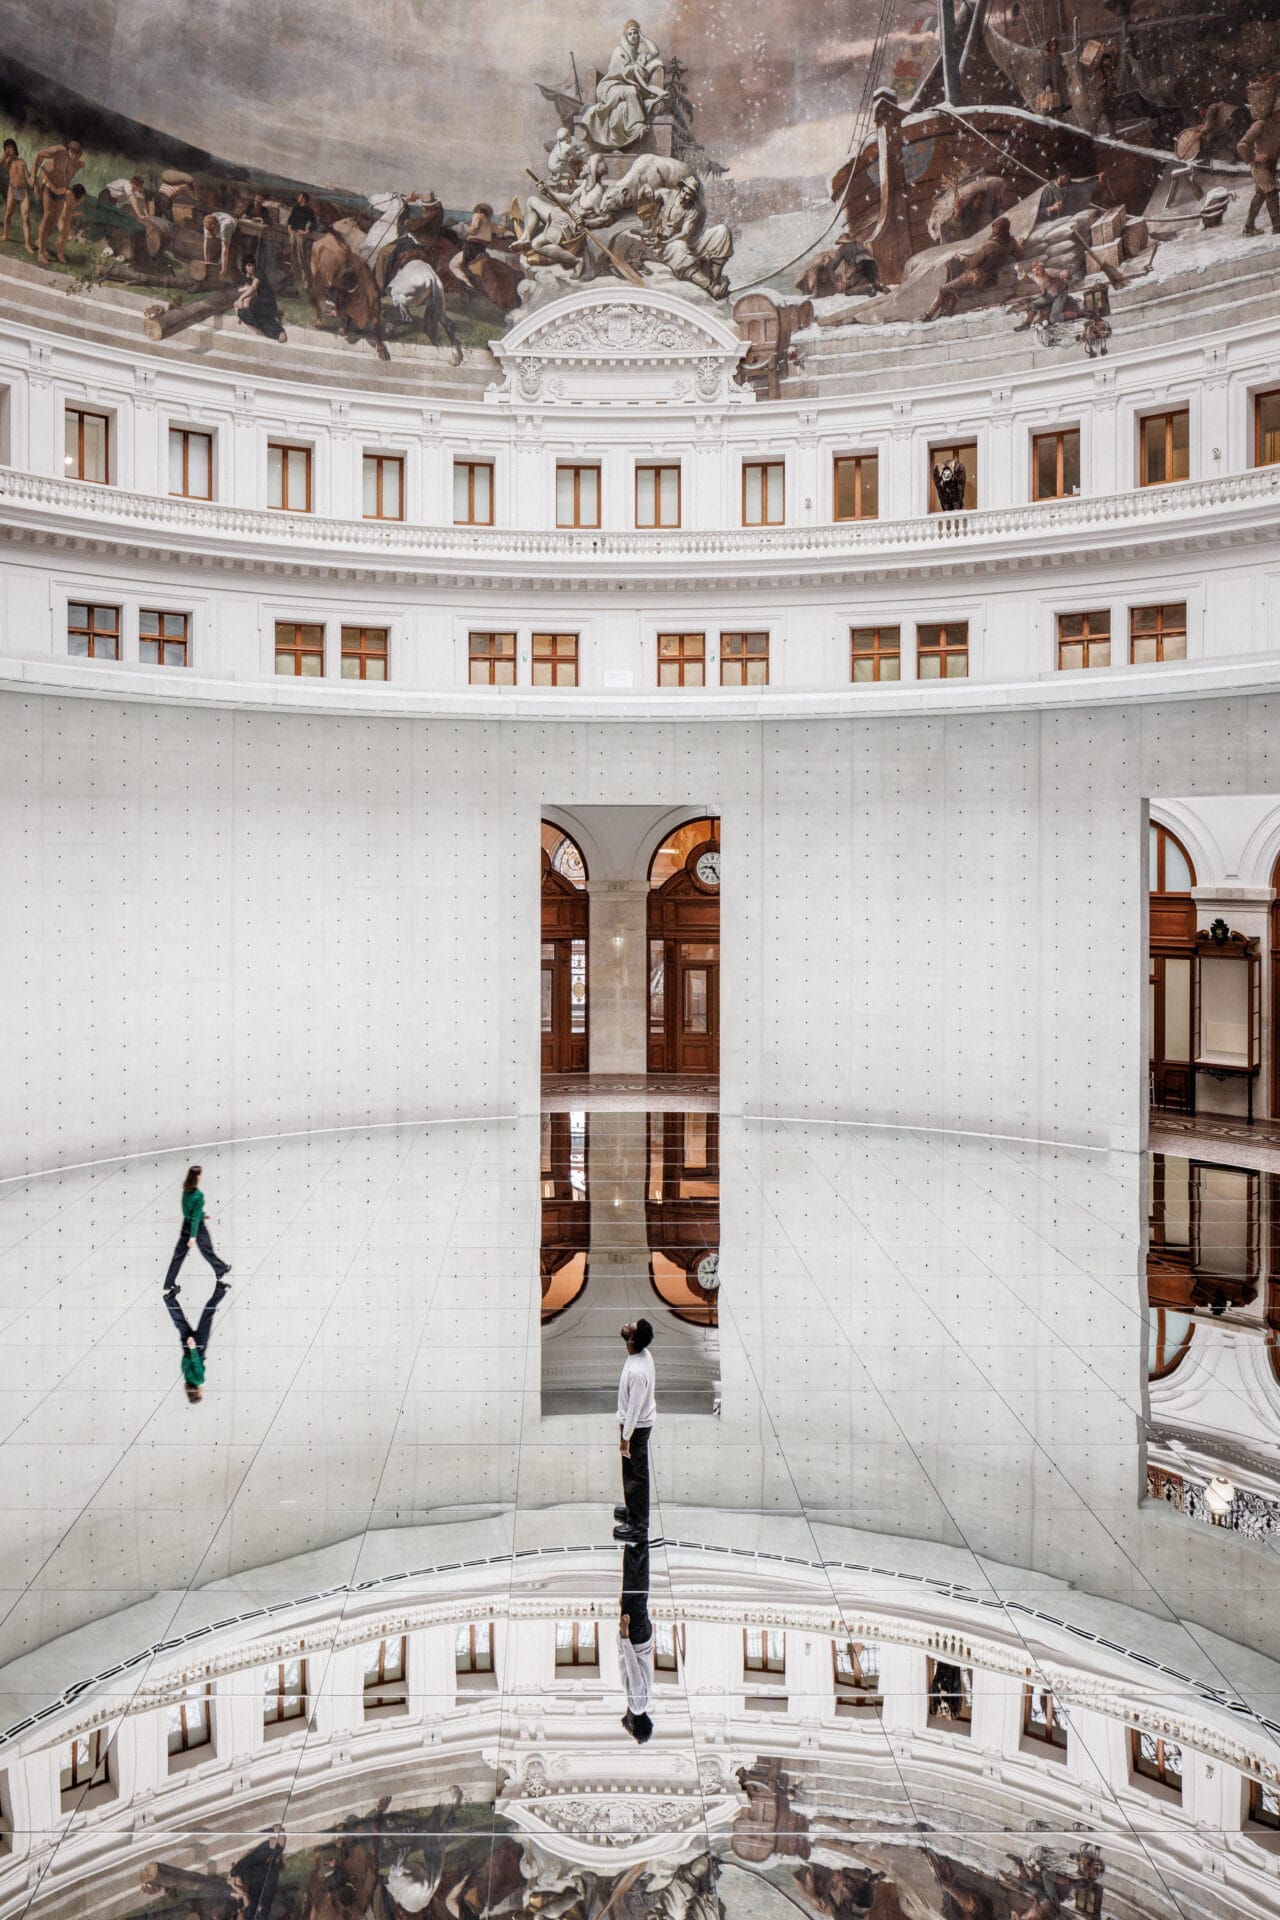 A large rotunda with a mirrored floor, concrete walls, and classical ornamentation on top.